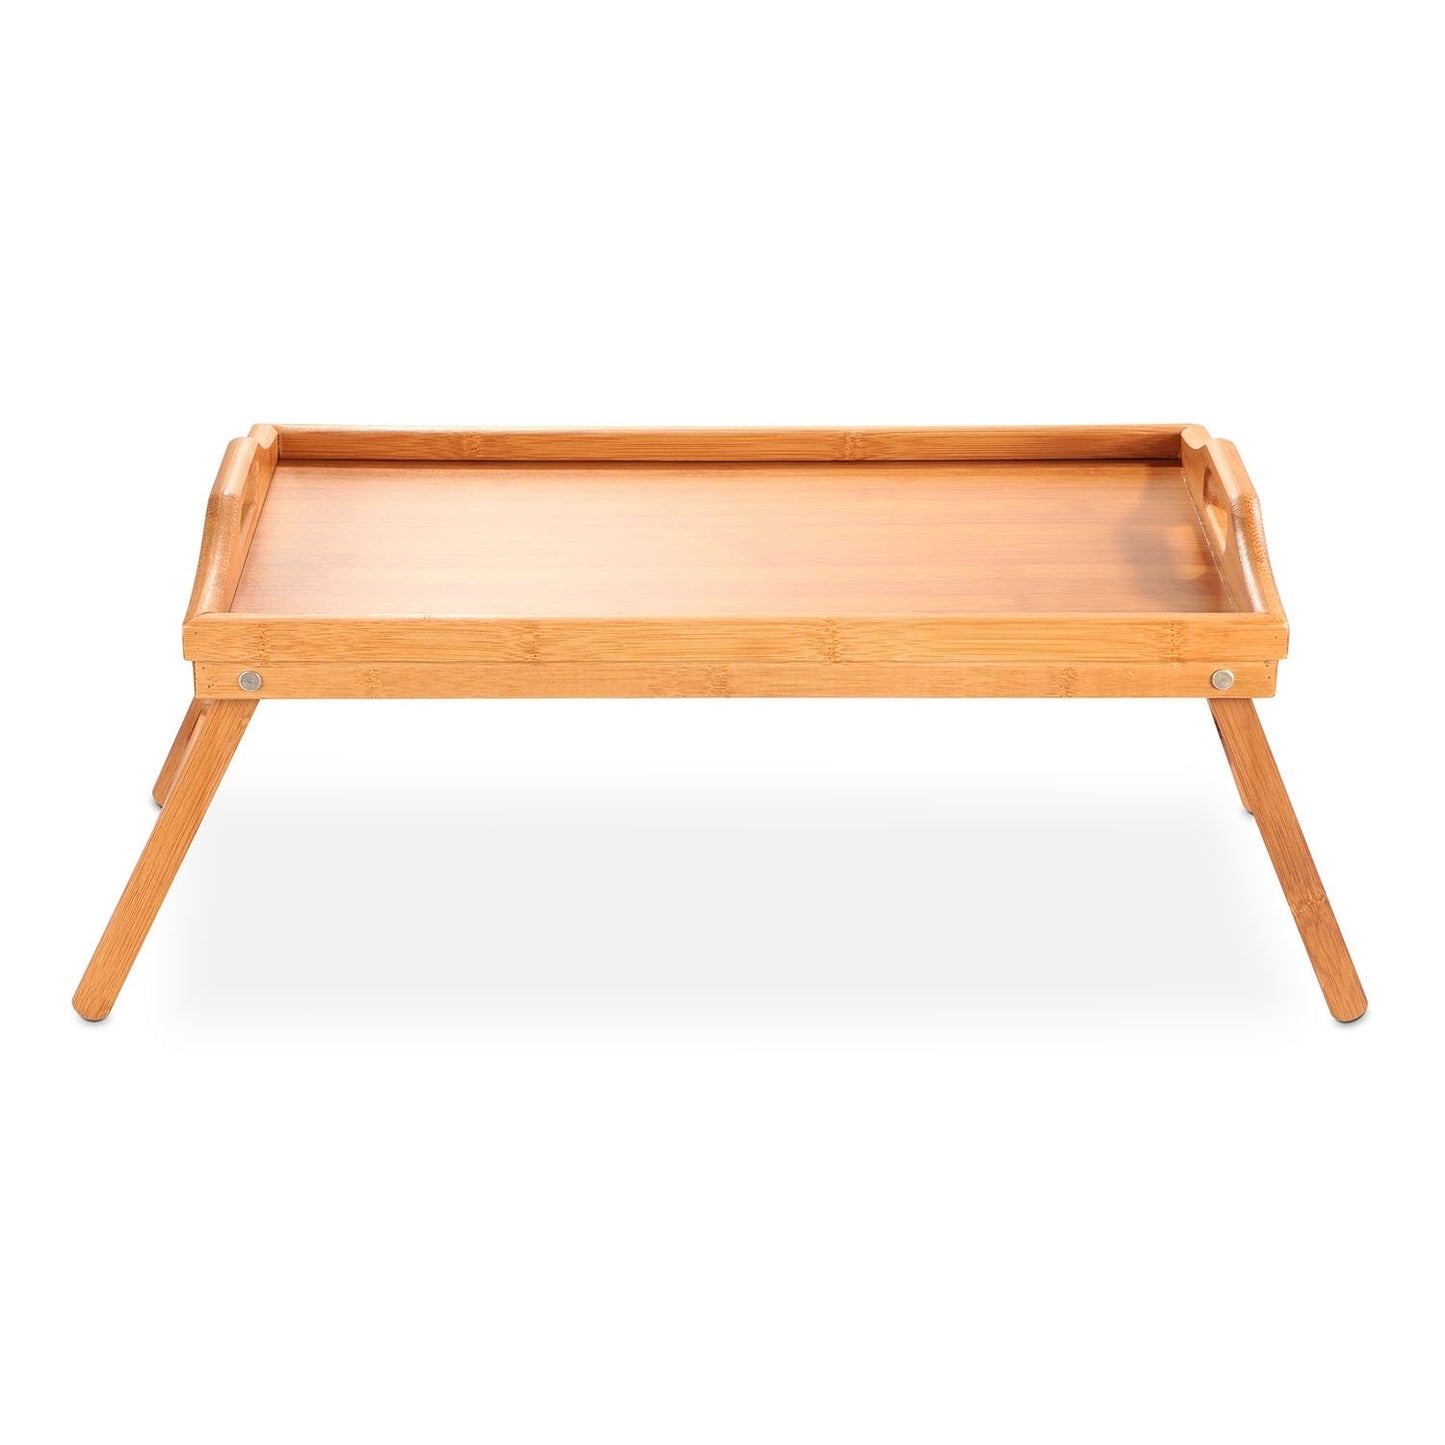 Bed Tray Table Breakfast Tray Bamboo Folding Bed Table Serving Snack Tray Desk with Handles